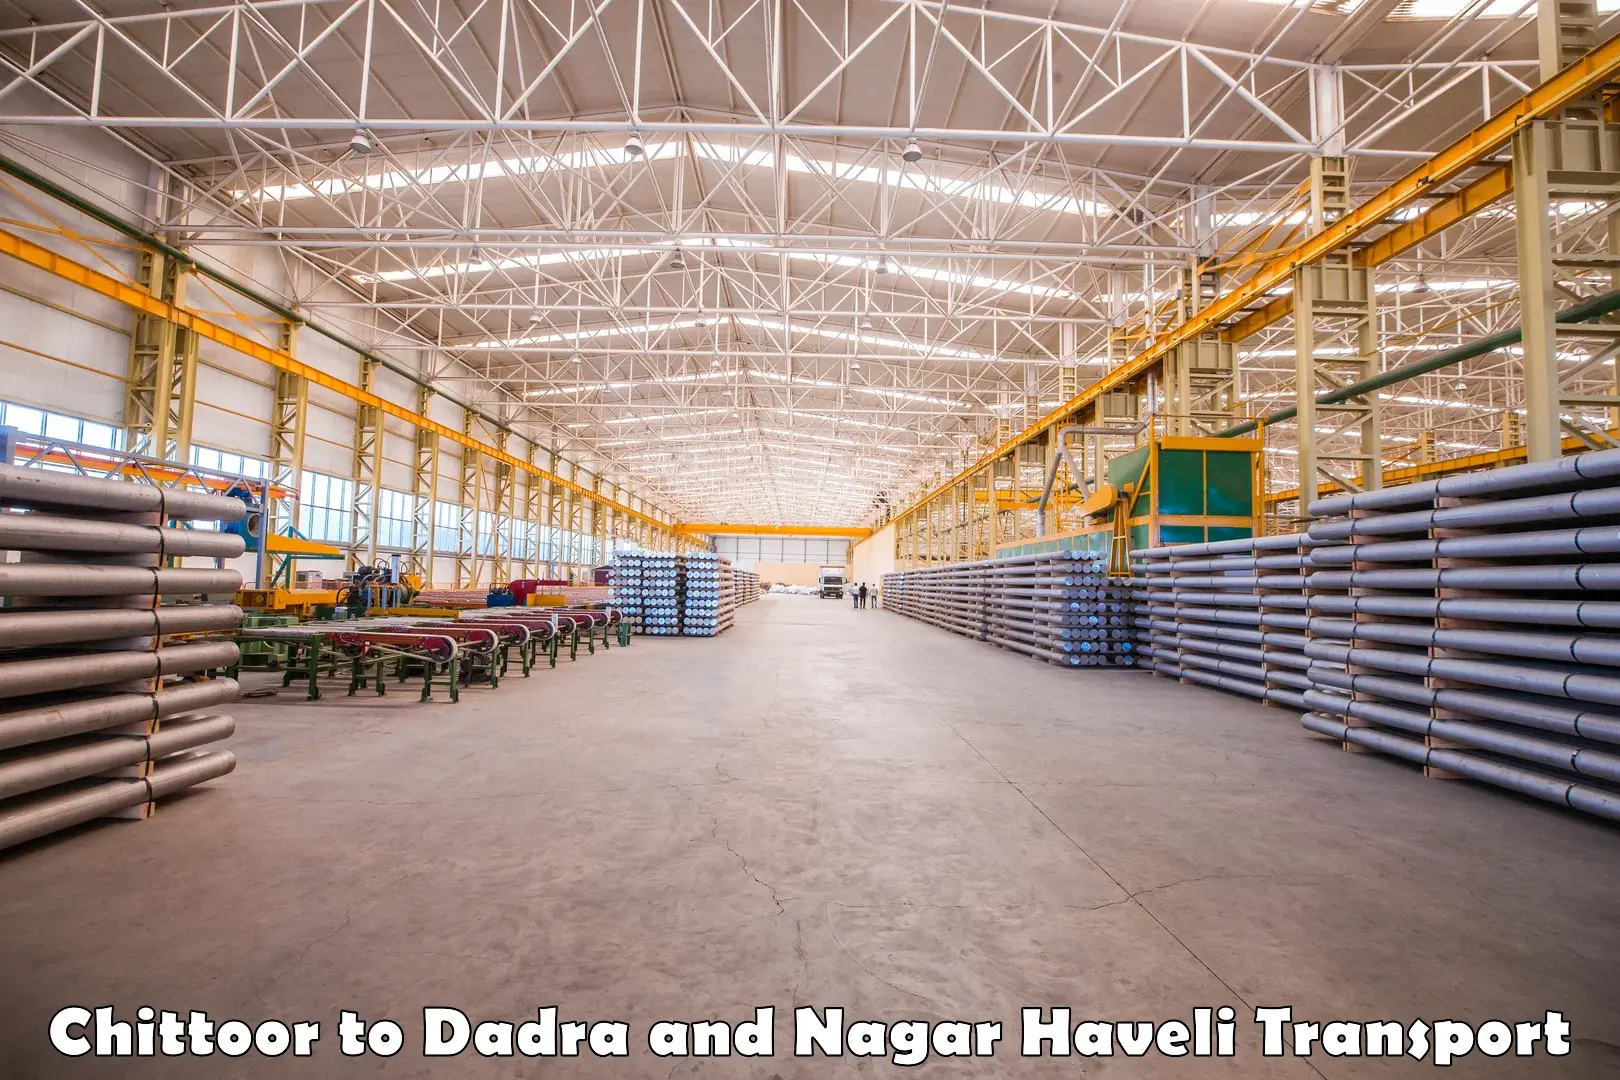 Container transport service Chittoor to Dadra and Nagar Haveli